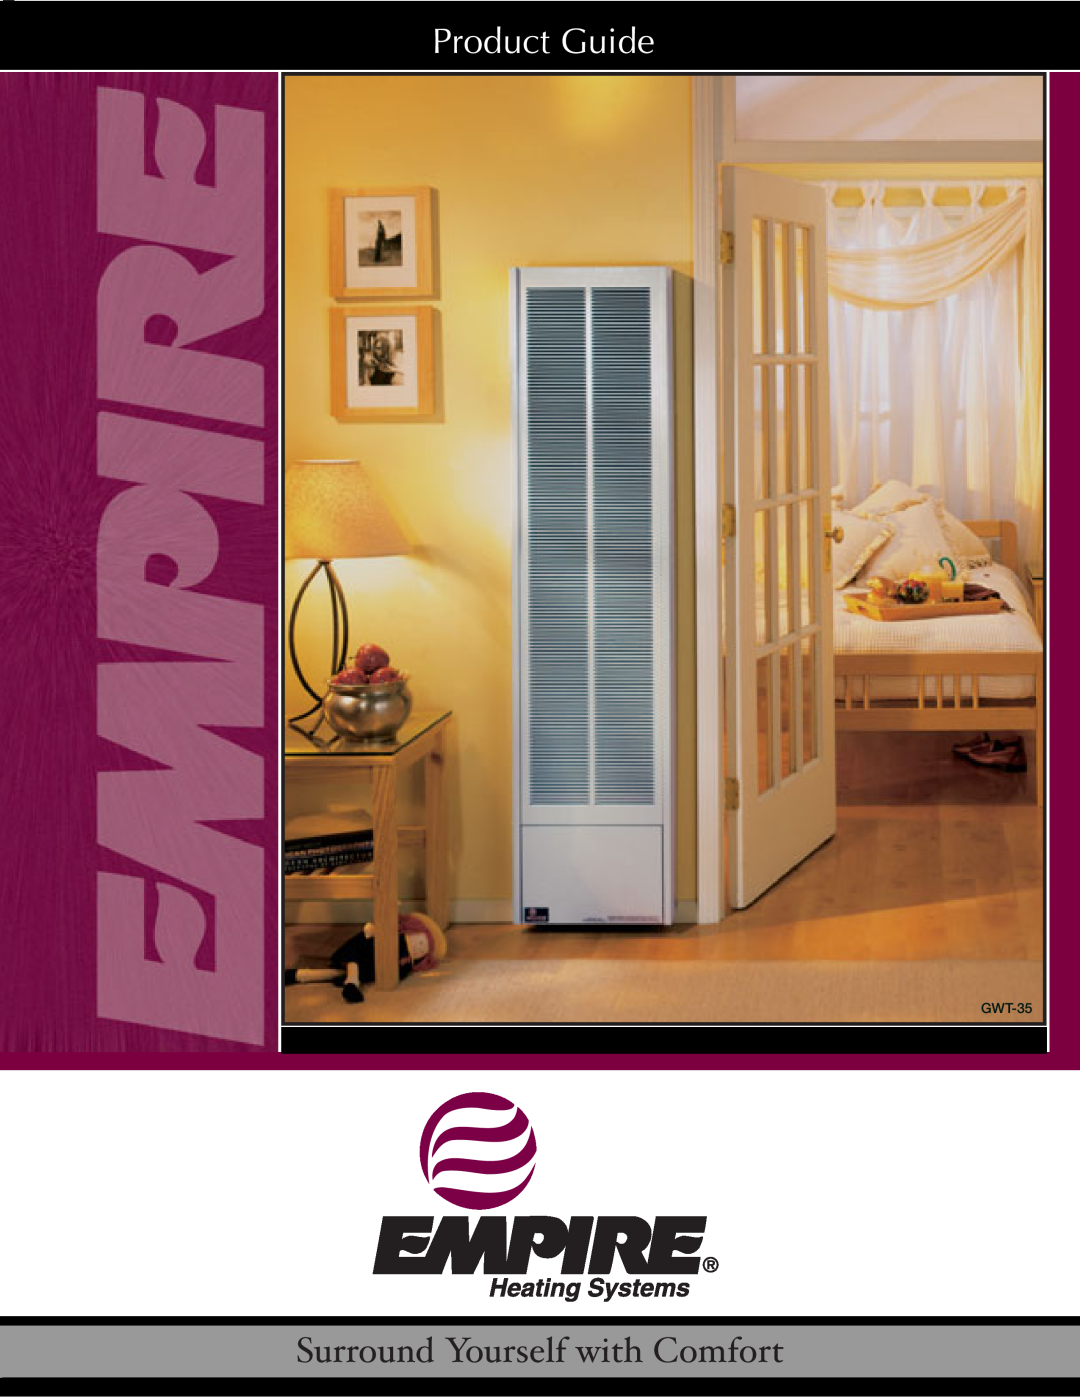 Empire Comfort Systems GWT-35 manual Product Guide, Surround Yourself with Comfort 